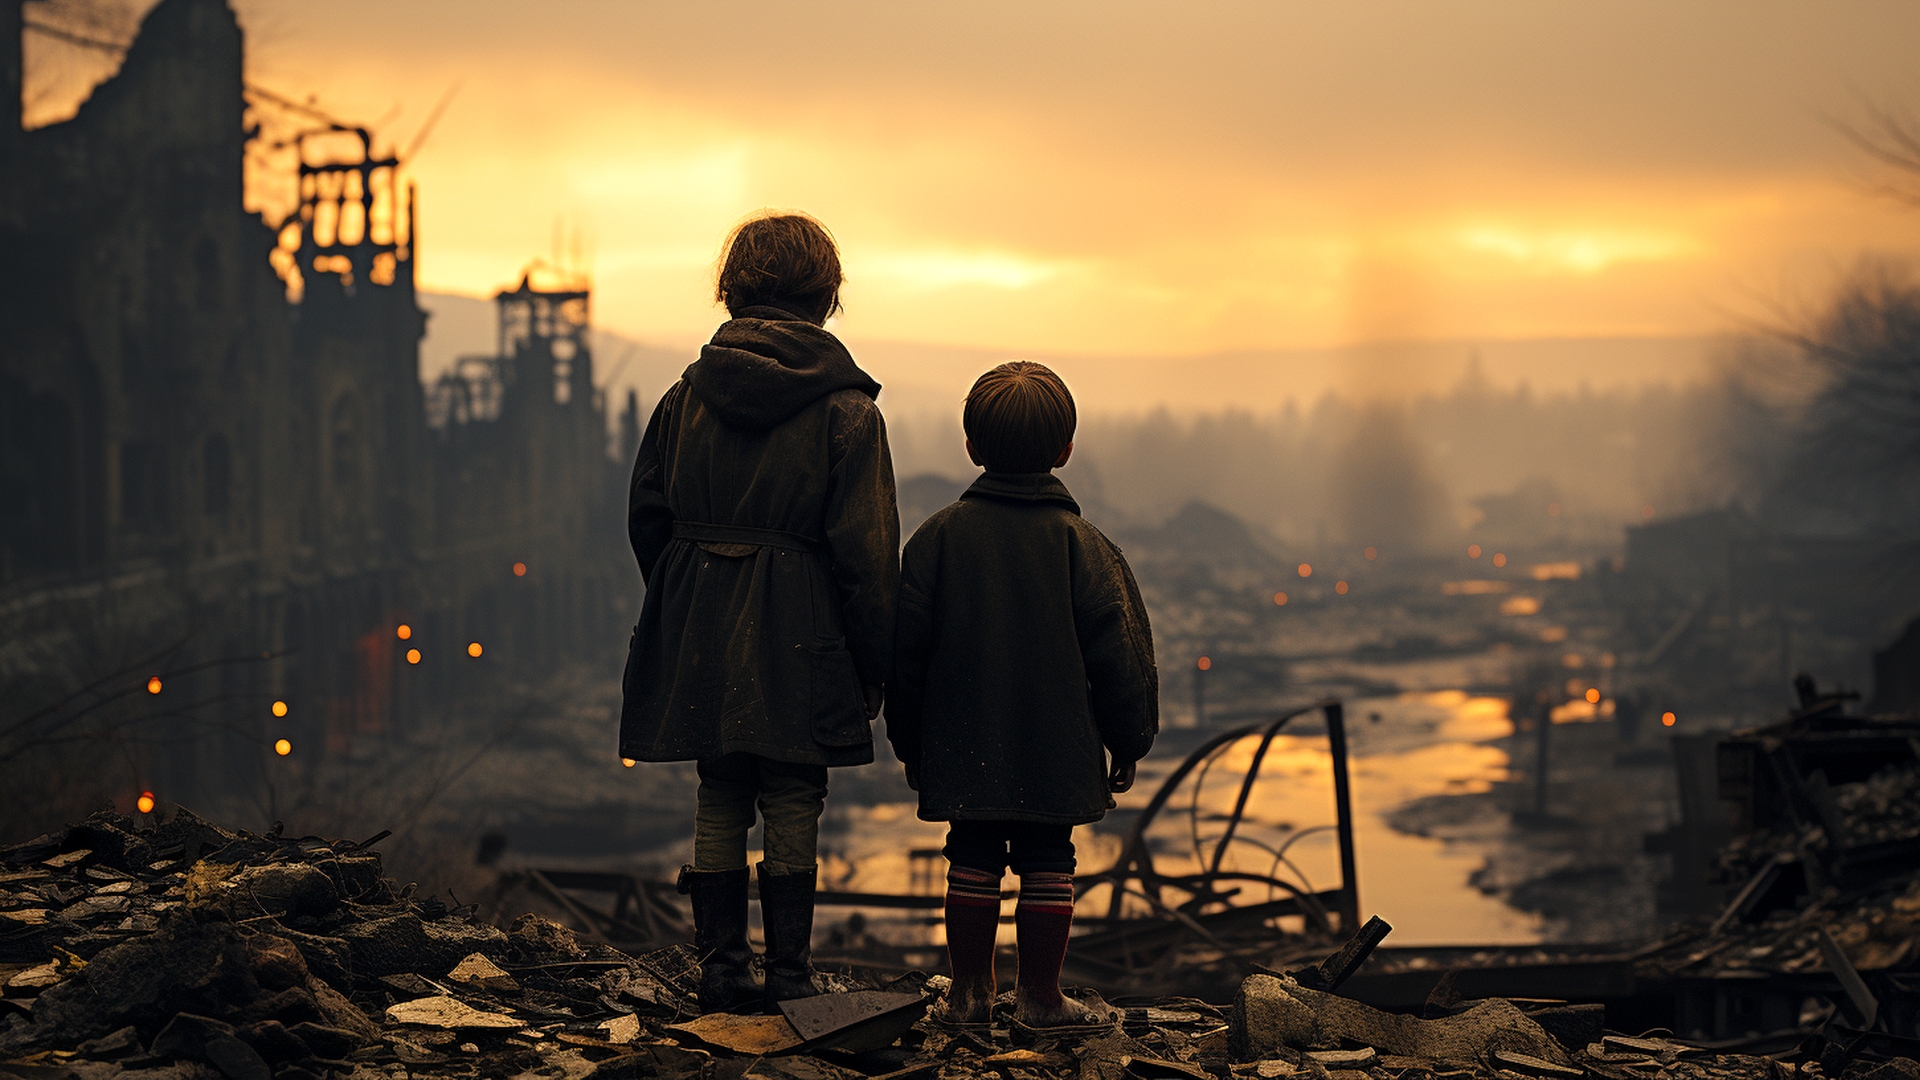 Children and a ruined city